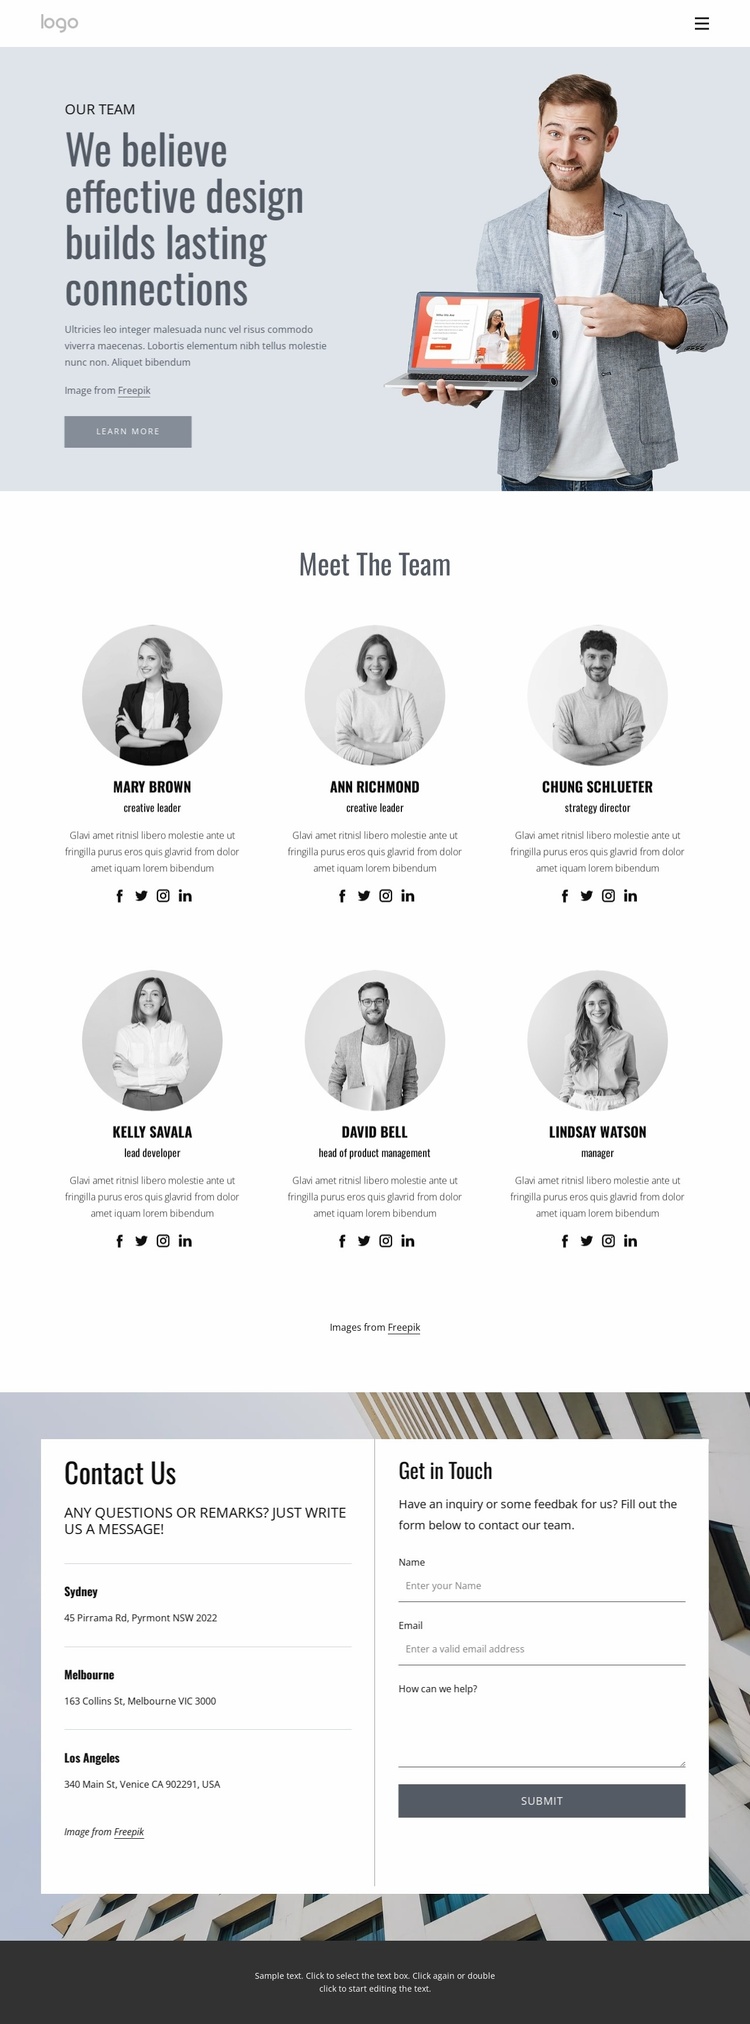 Web design experts eCommerce Template